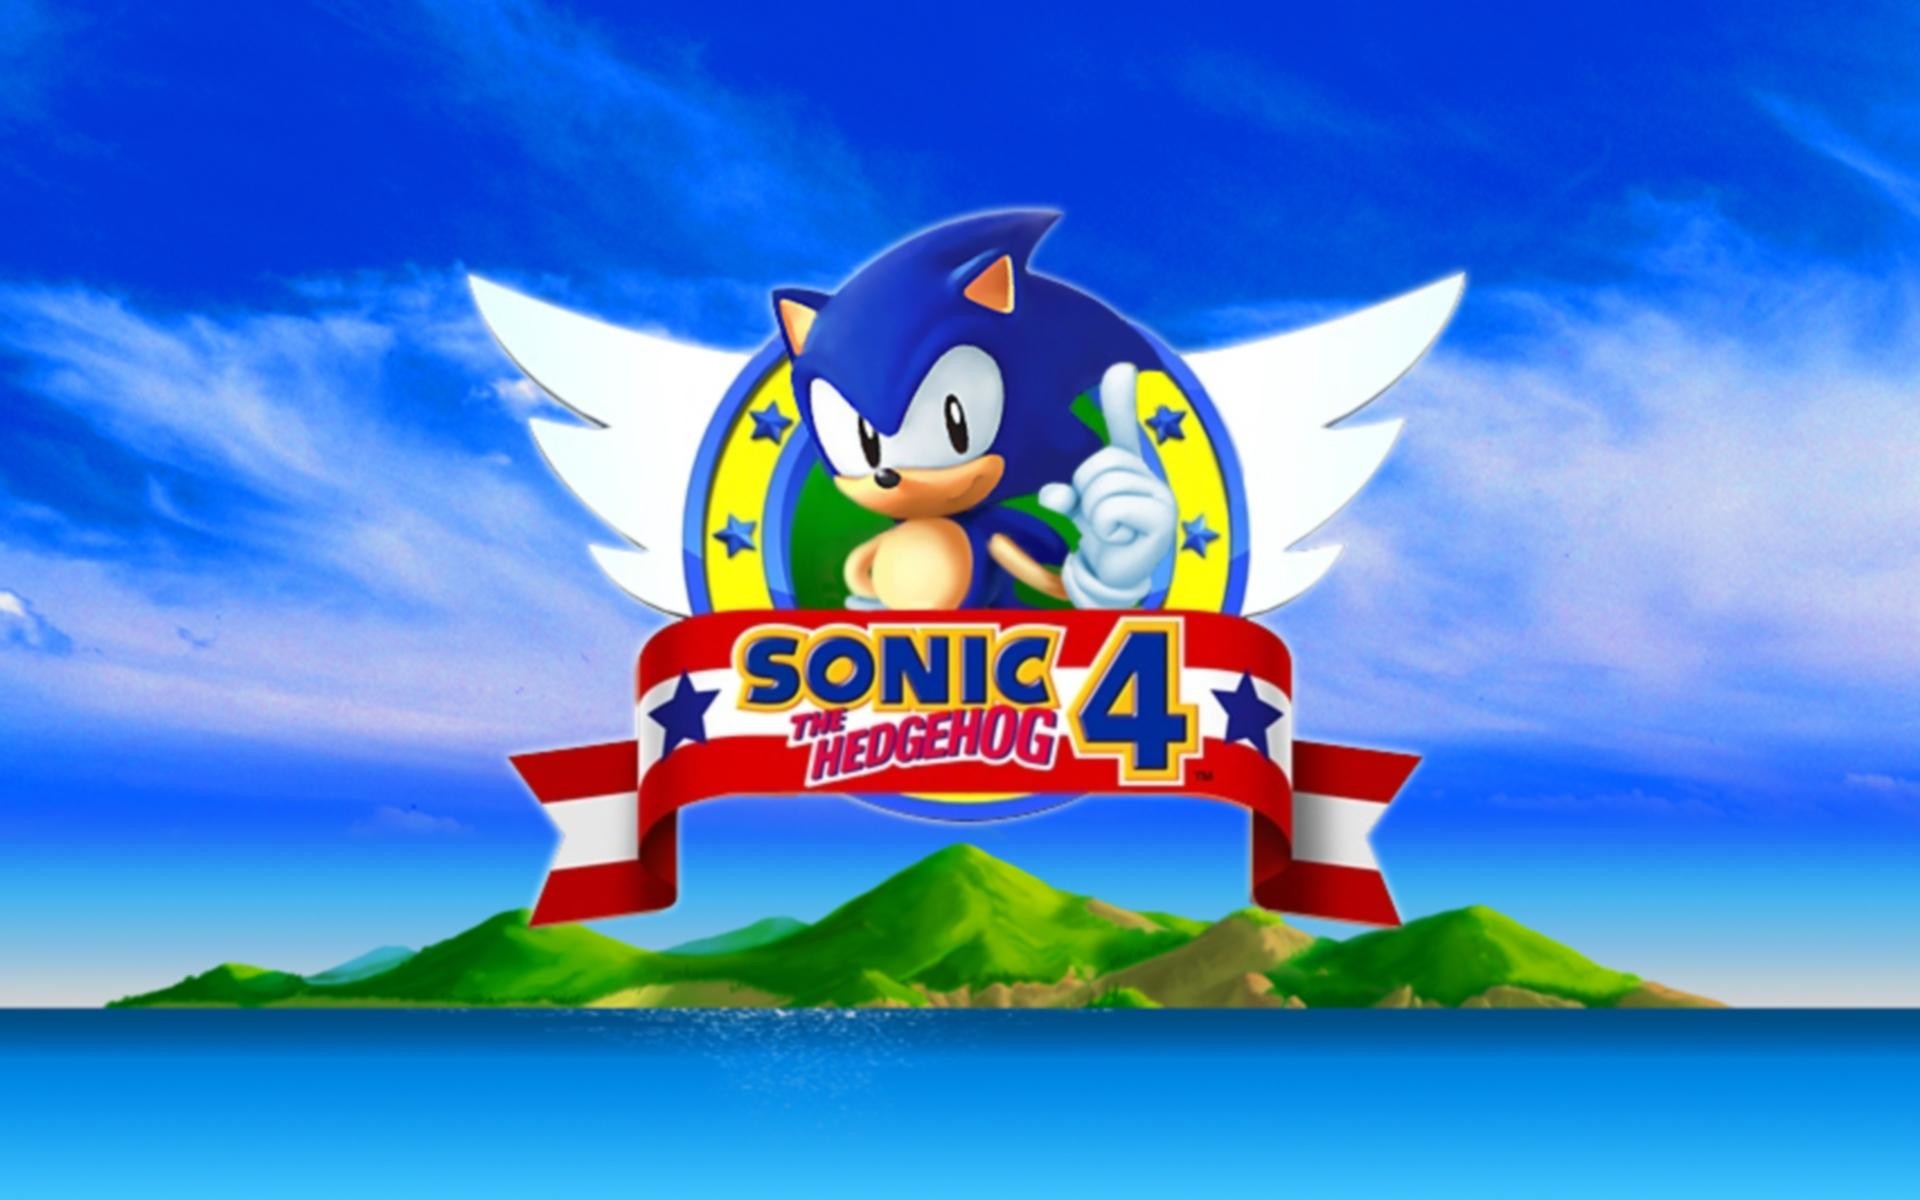 Sonic Backgrounds 68 Pictures